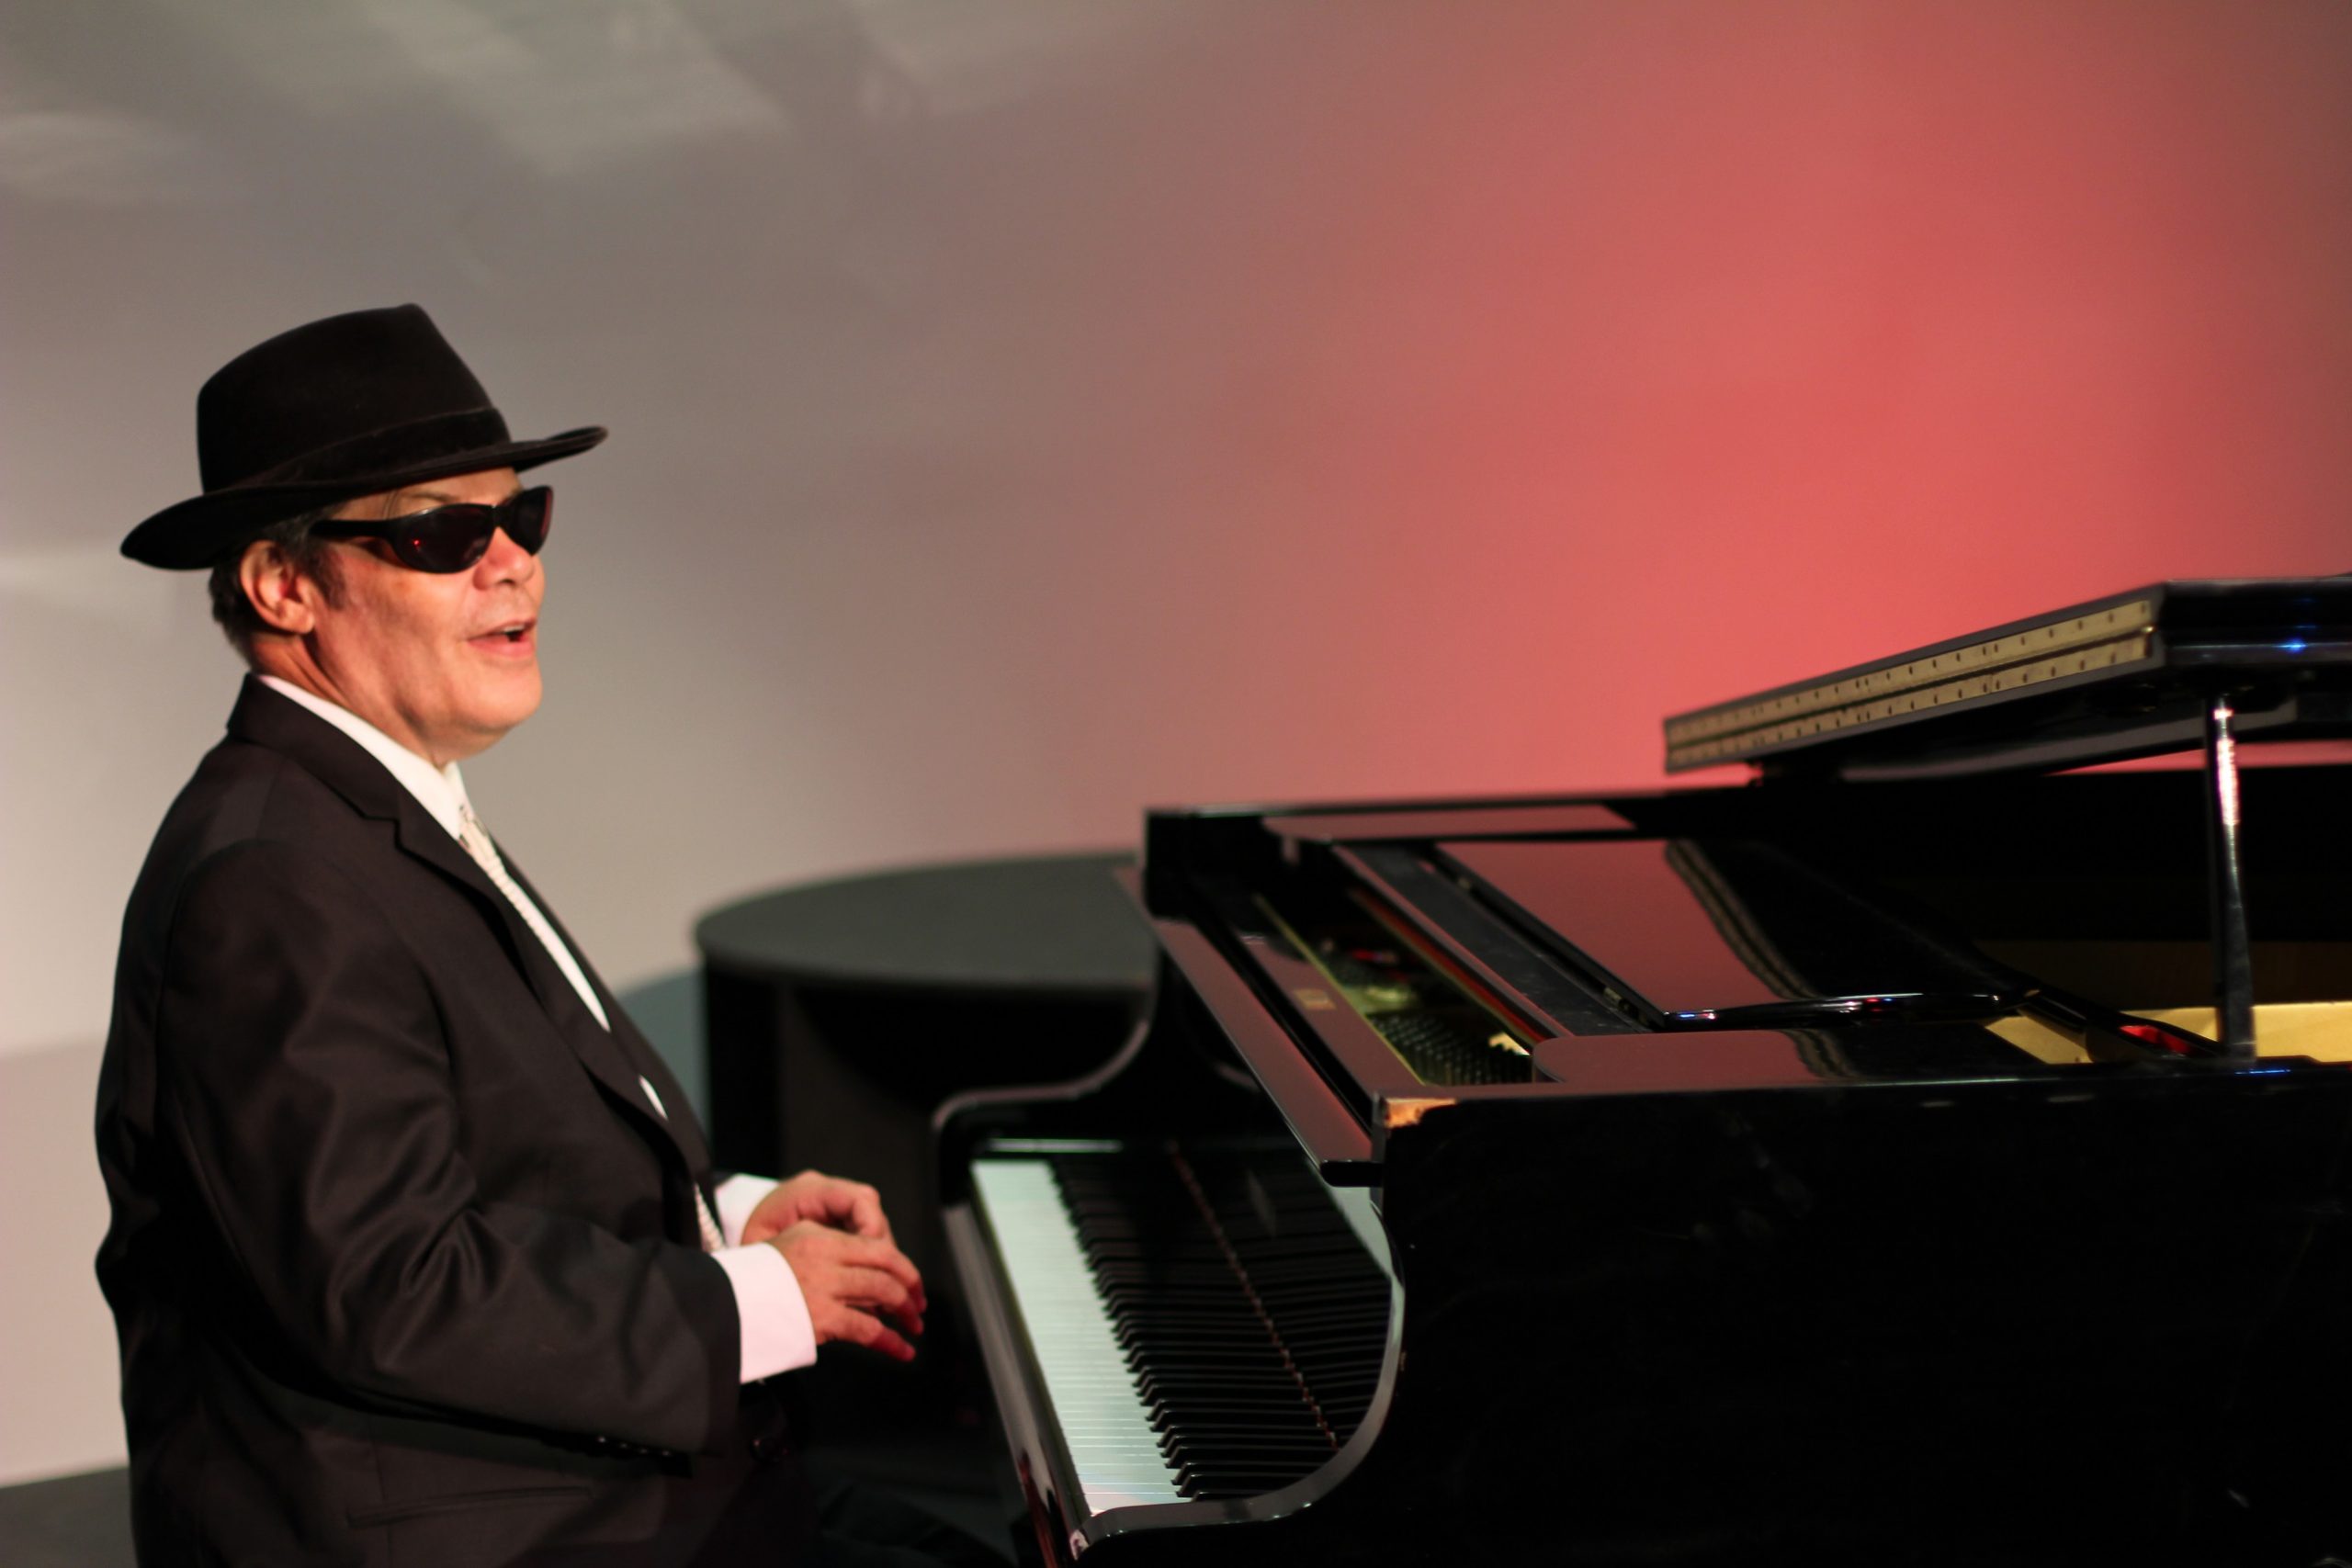 Photo of Jeff Usher sitting down at a grand piano wearing a suit